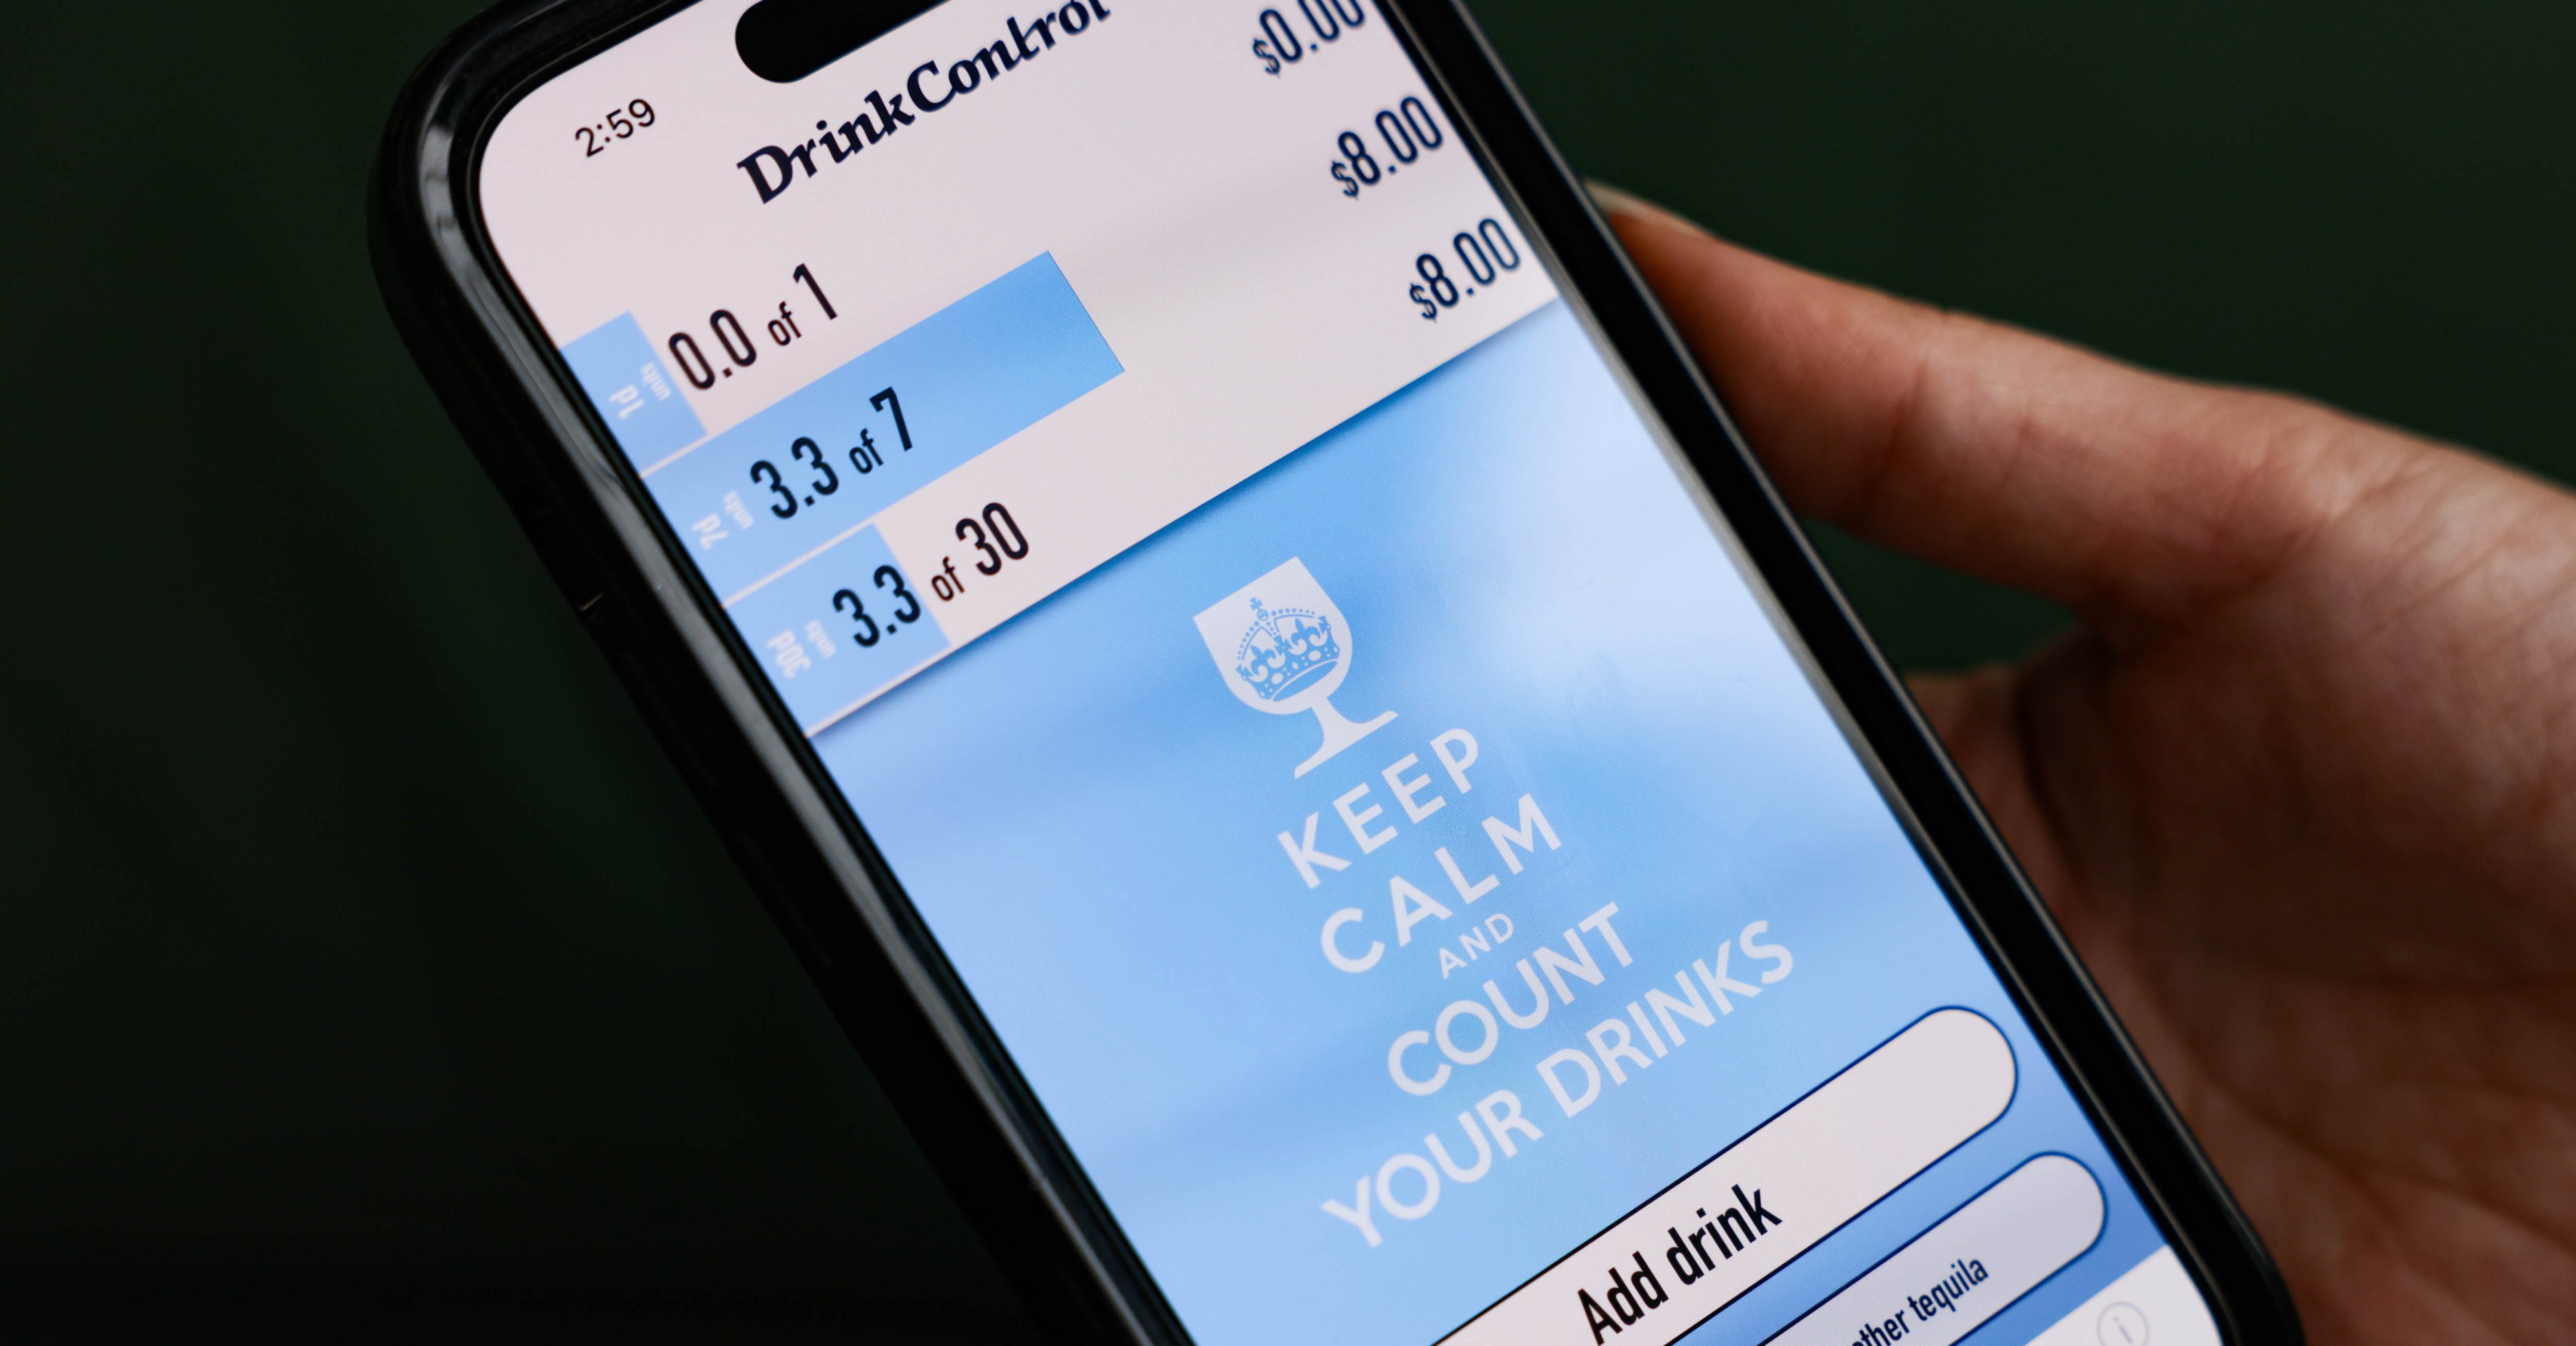 A close up of the DrinkControl on a mobile phone, which helps users track their alcohol intake with color-coded bars and motivating slogans.